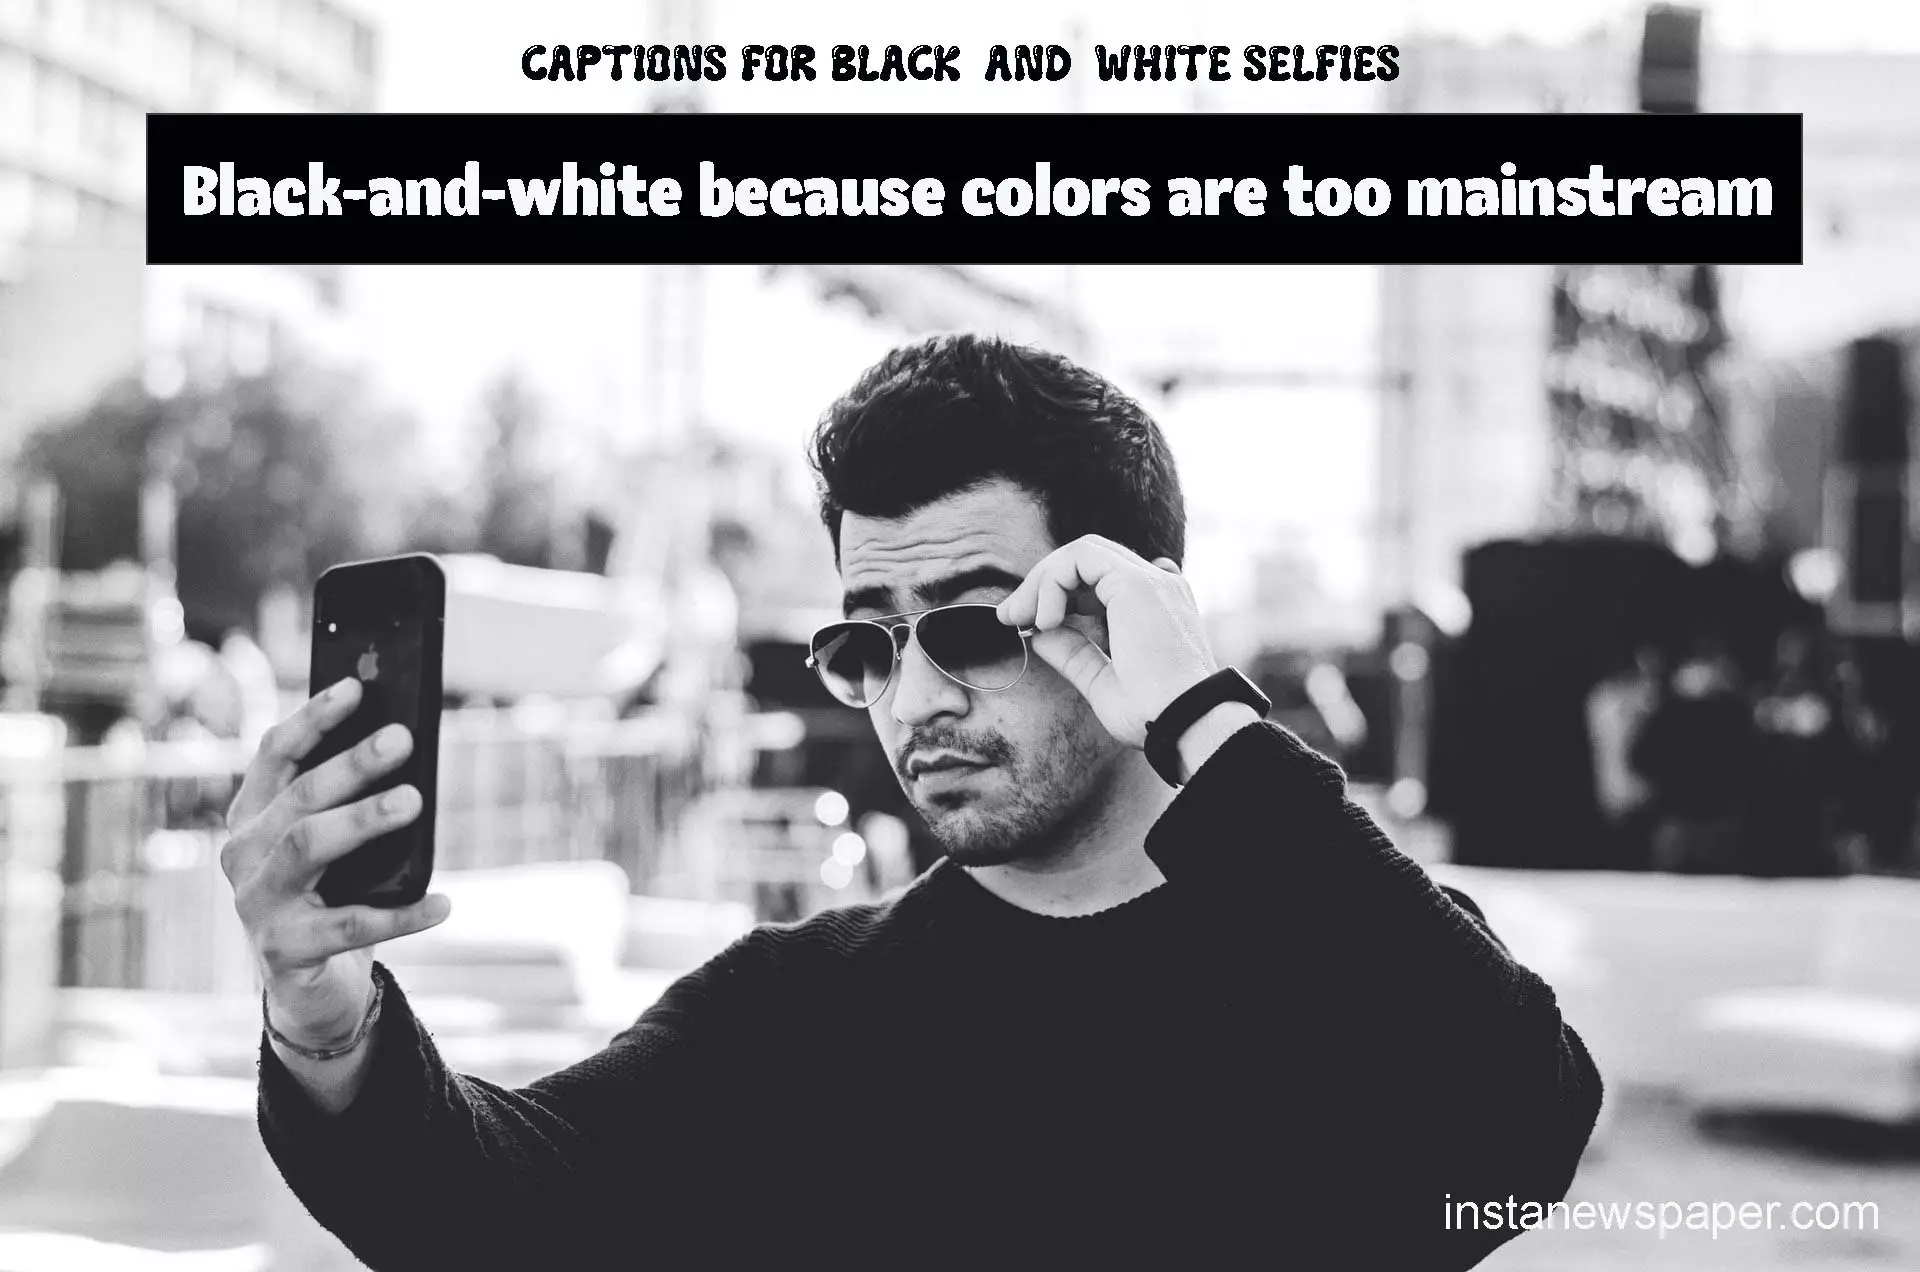 Captions for Black-and-white Selfies